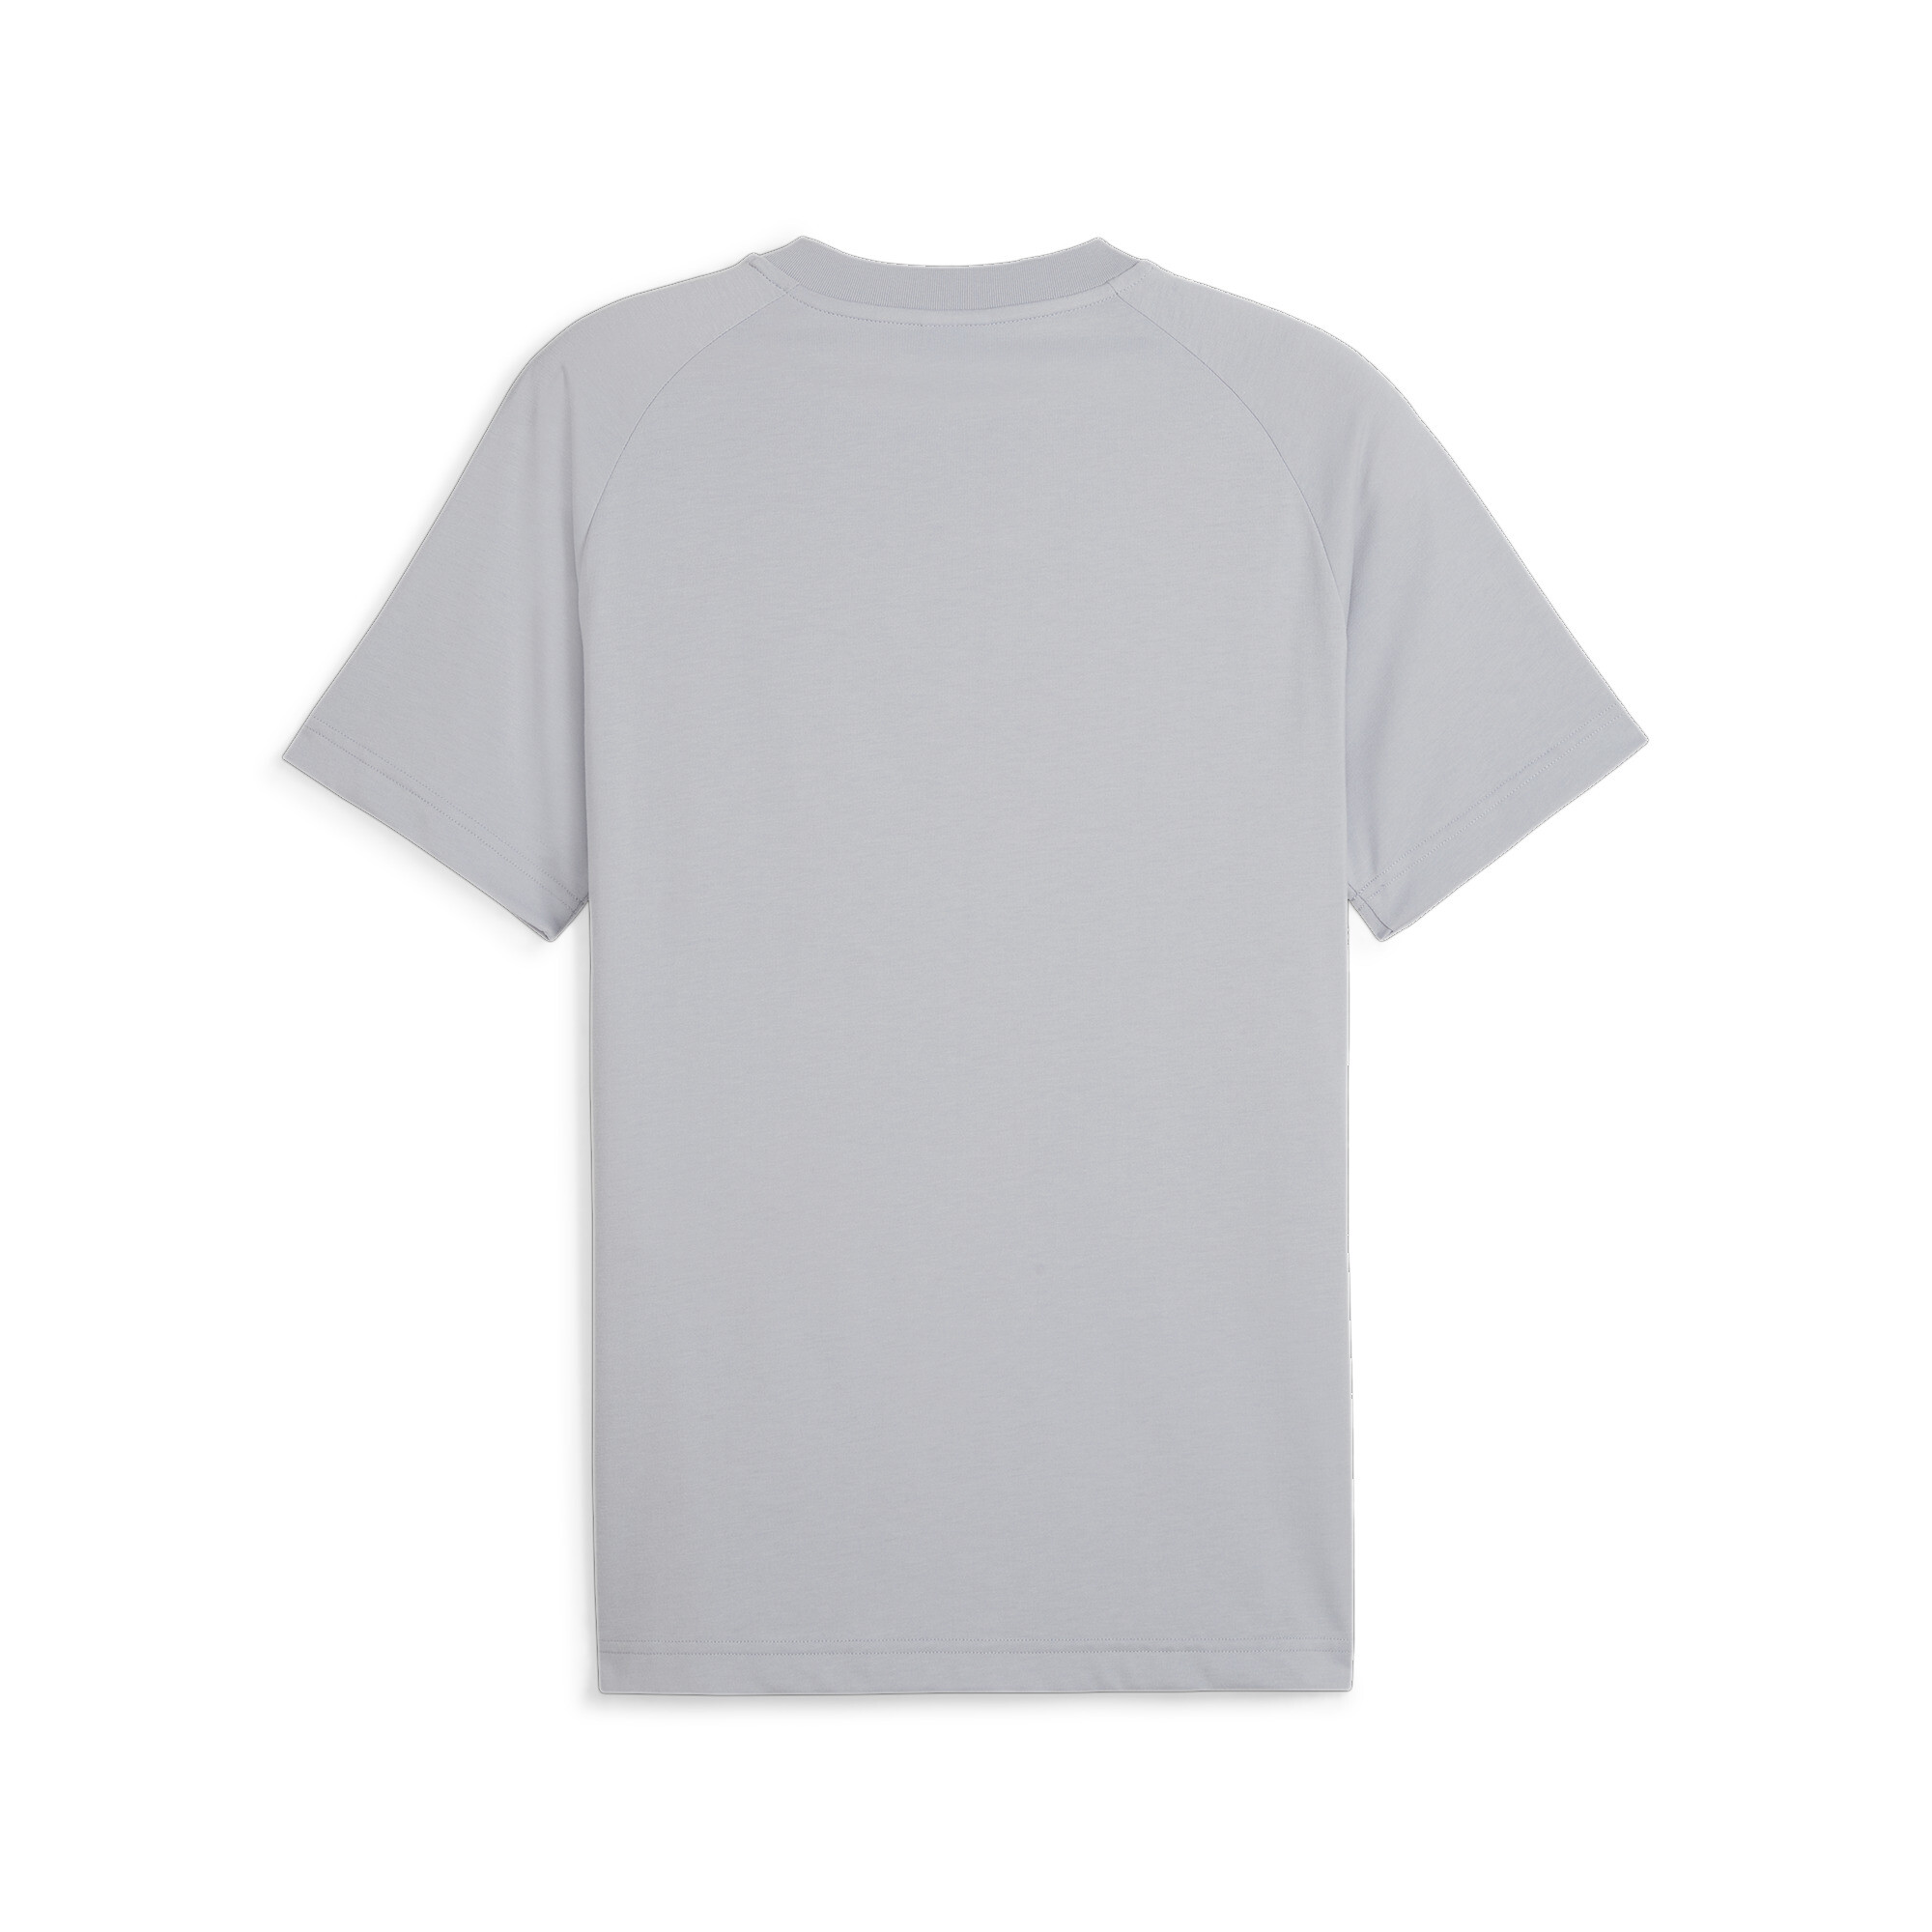 Men's PUMATECH Pocket T-Shirt In Gray, Size Small